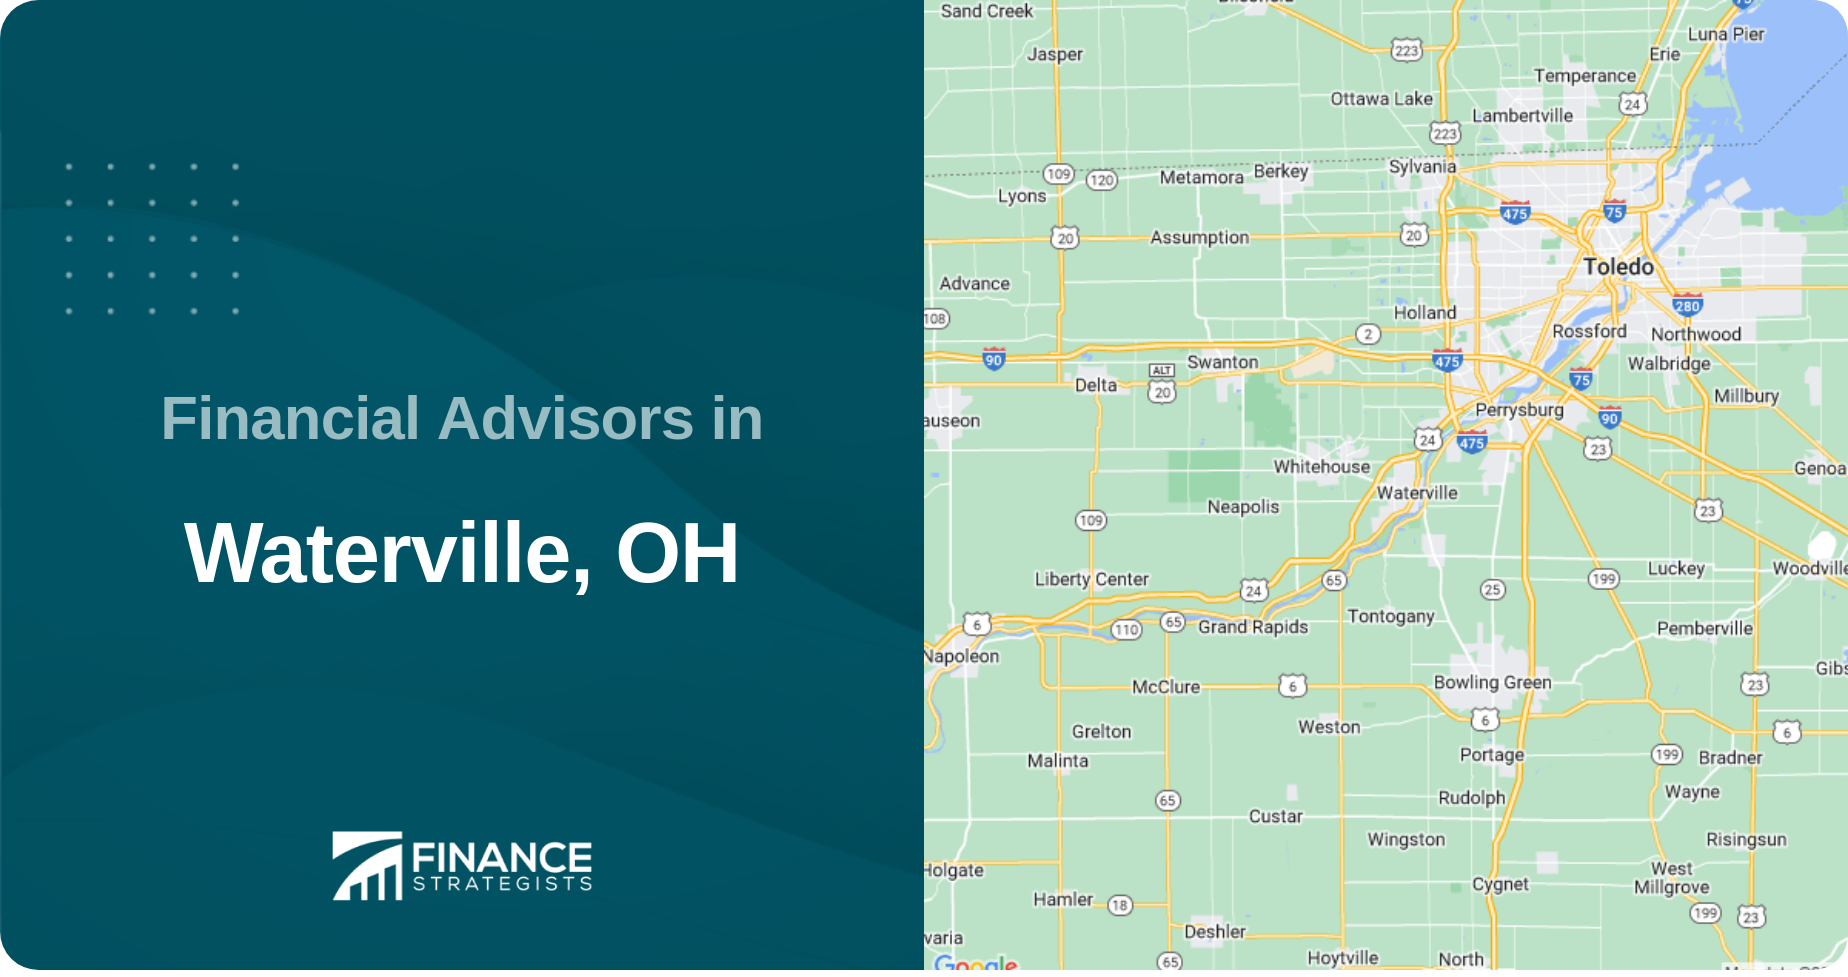 Financial Advisors in Waterville, OH